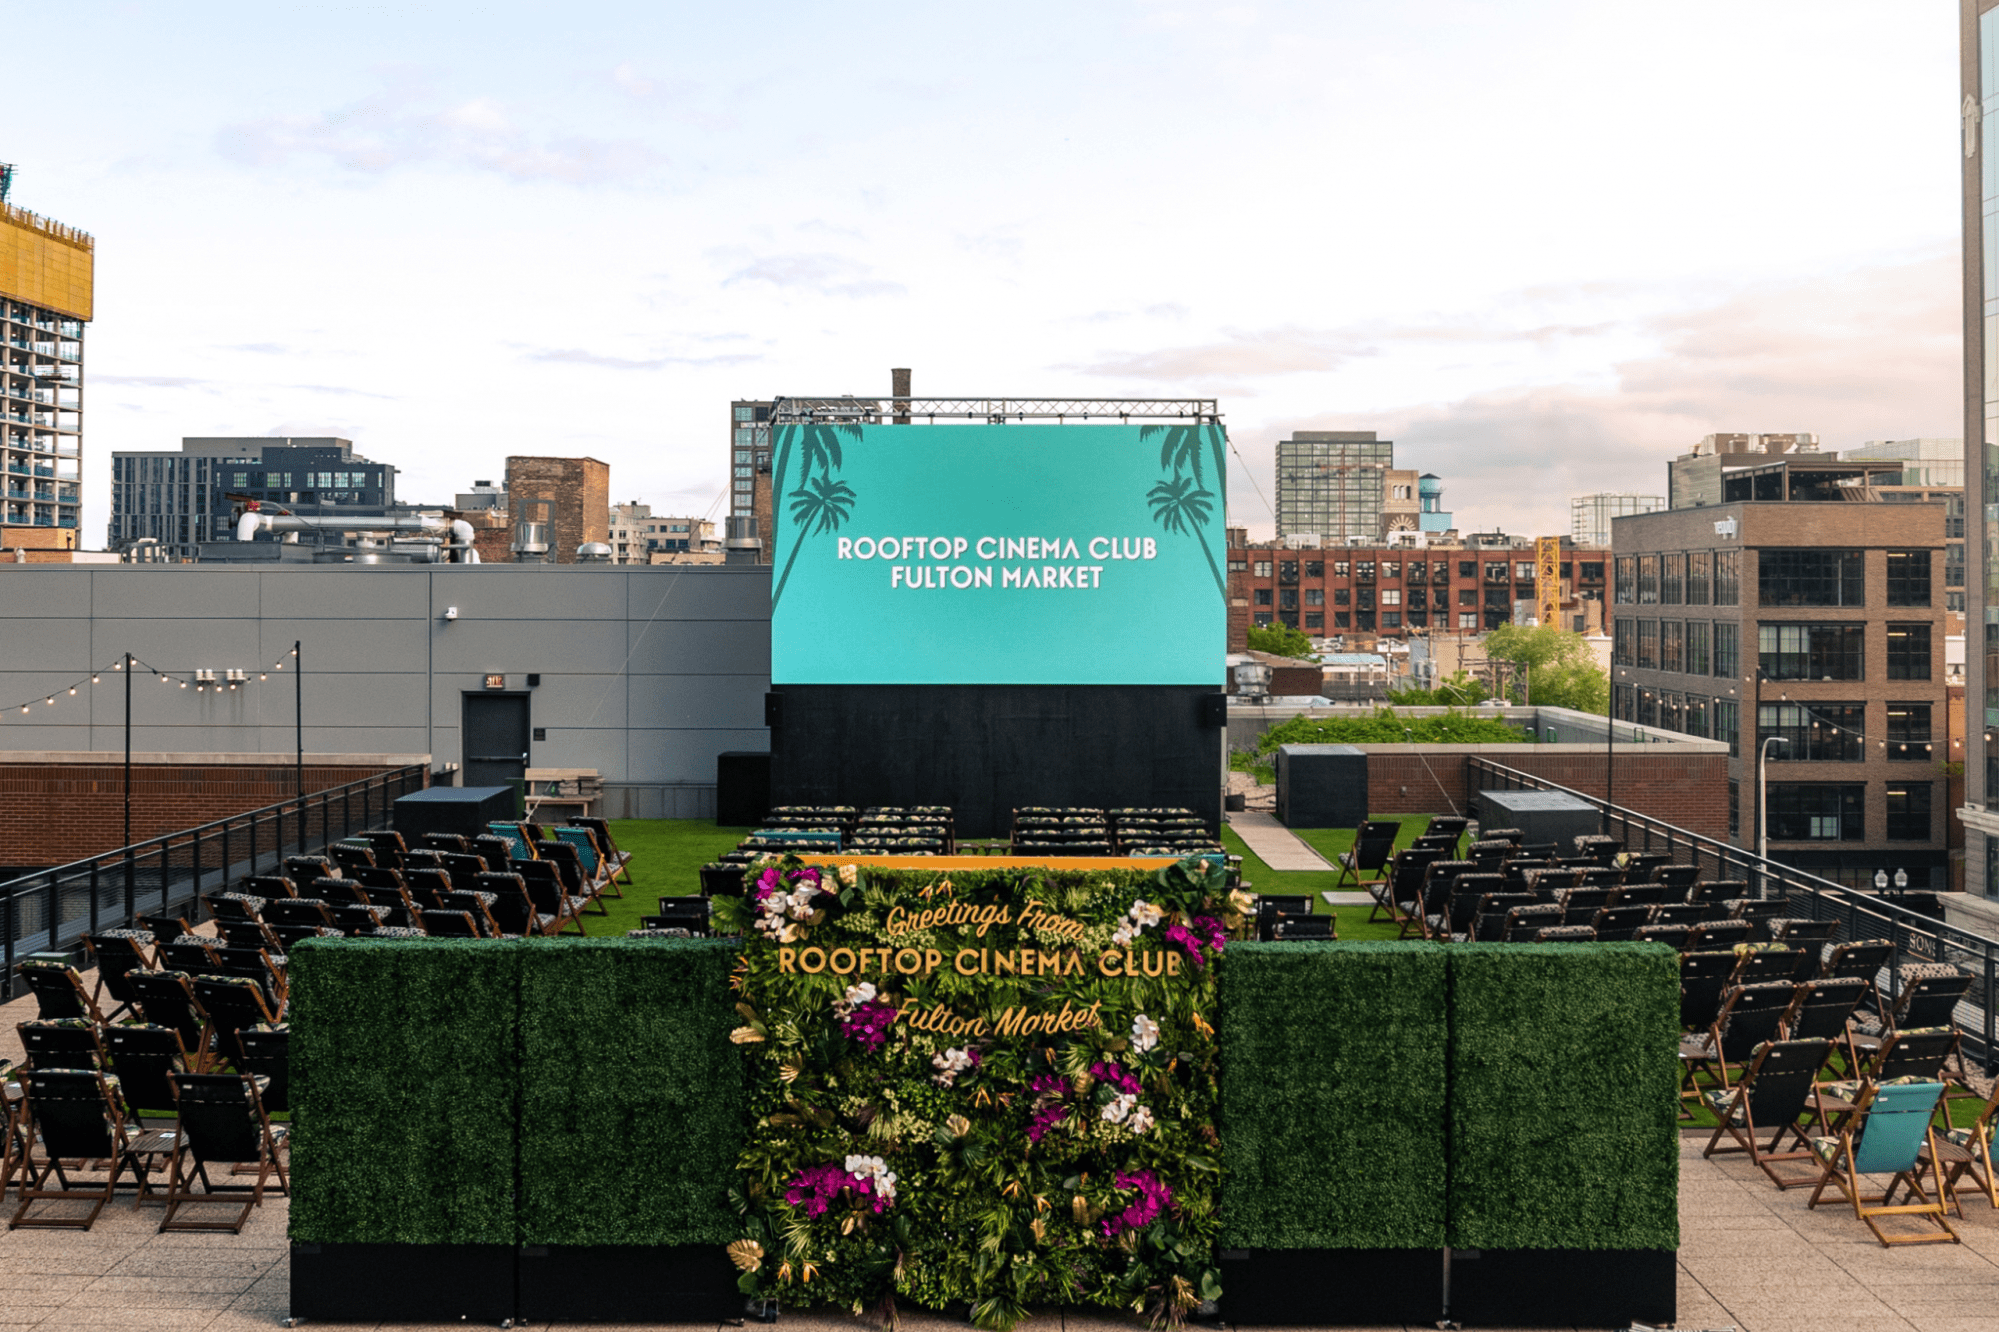 Rooftop Cinema Club: Watch Movies On Amazing Rooftop in Fulton Market